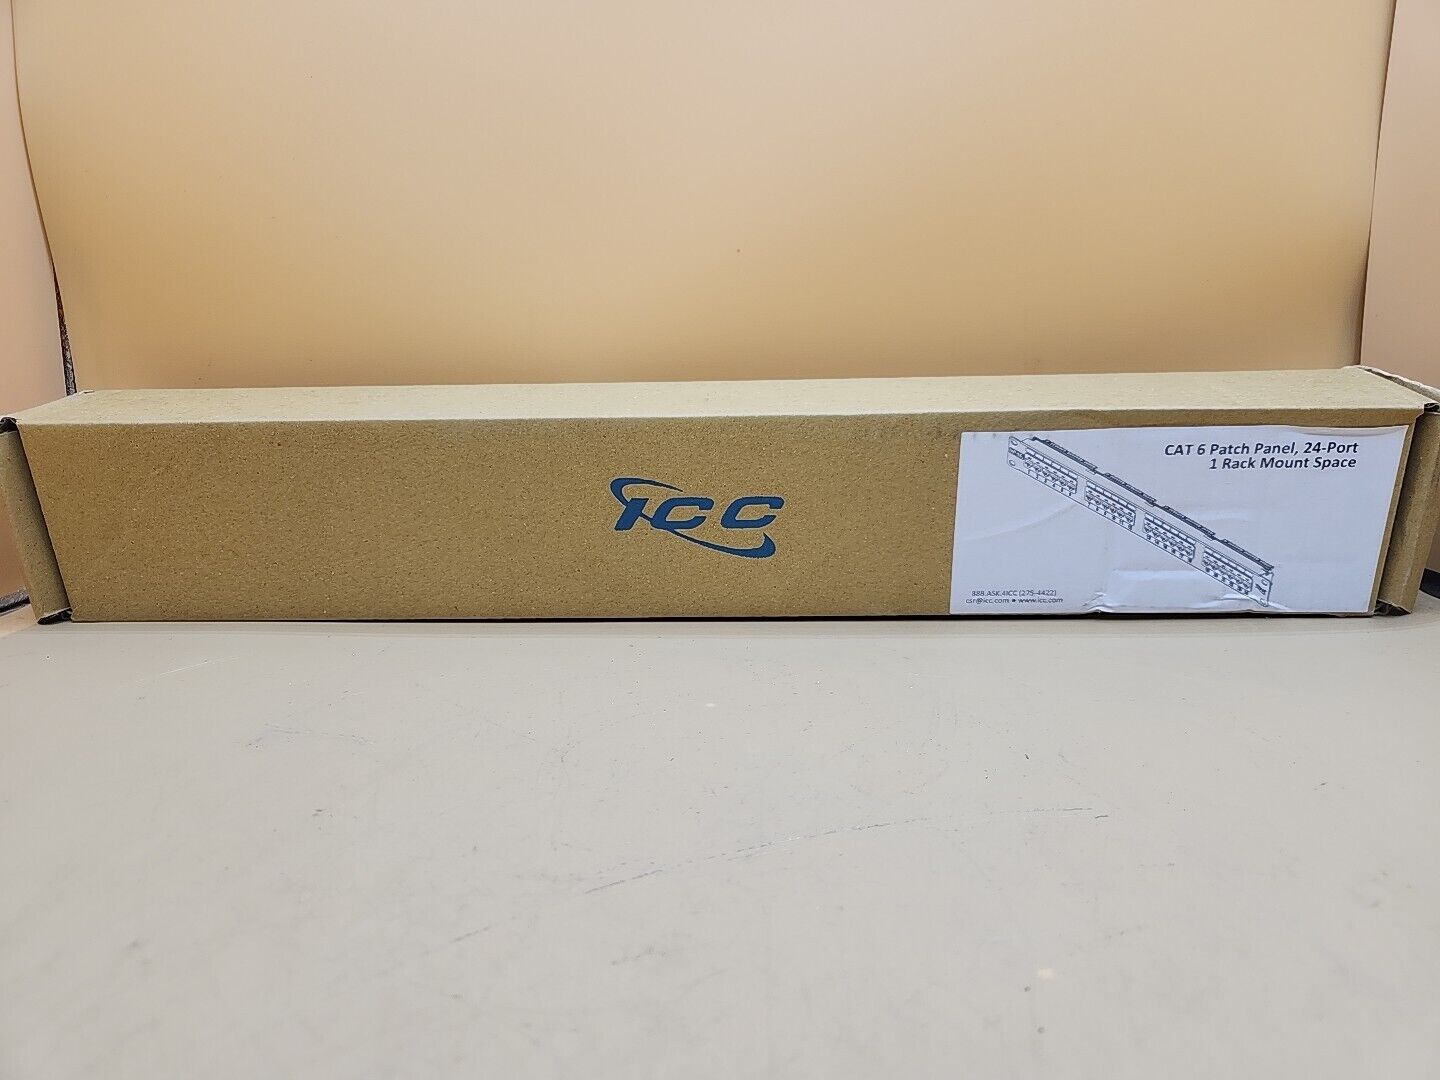 ICC PATCH PANEL CAT 6 24 PORT 1 RMS ICMPP02460 NEW